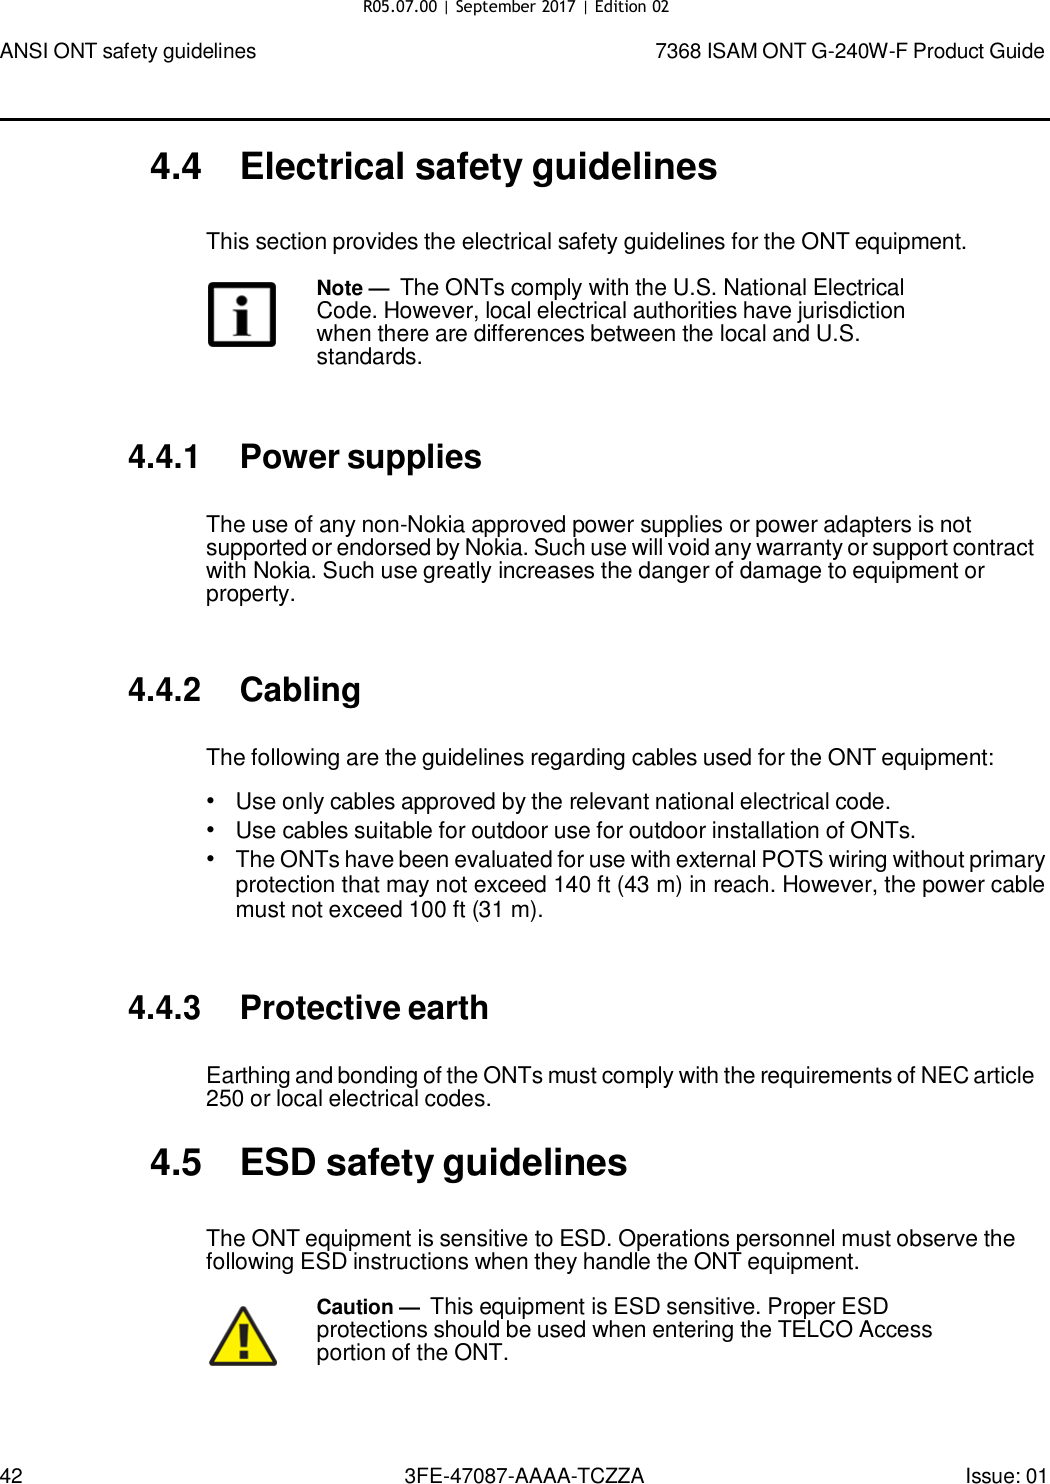 Page 39 of Nokia Bell G240WFV2 7368 ISAM GPON ONU User Manual 7368 ISAM ONT G 240W F Product Guide